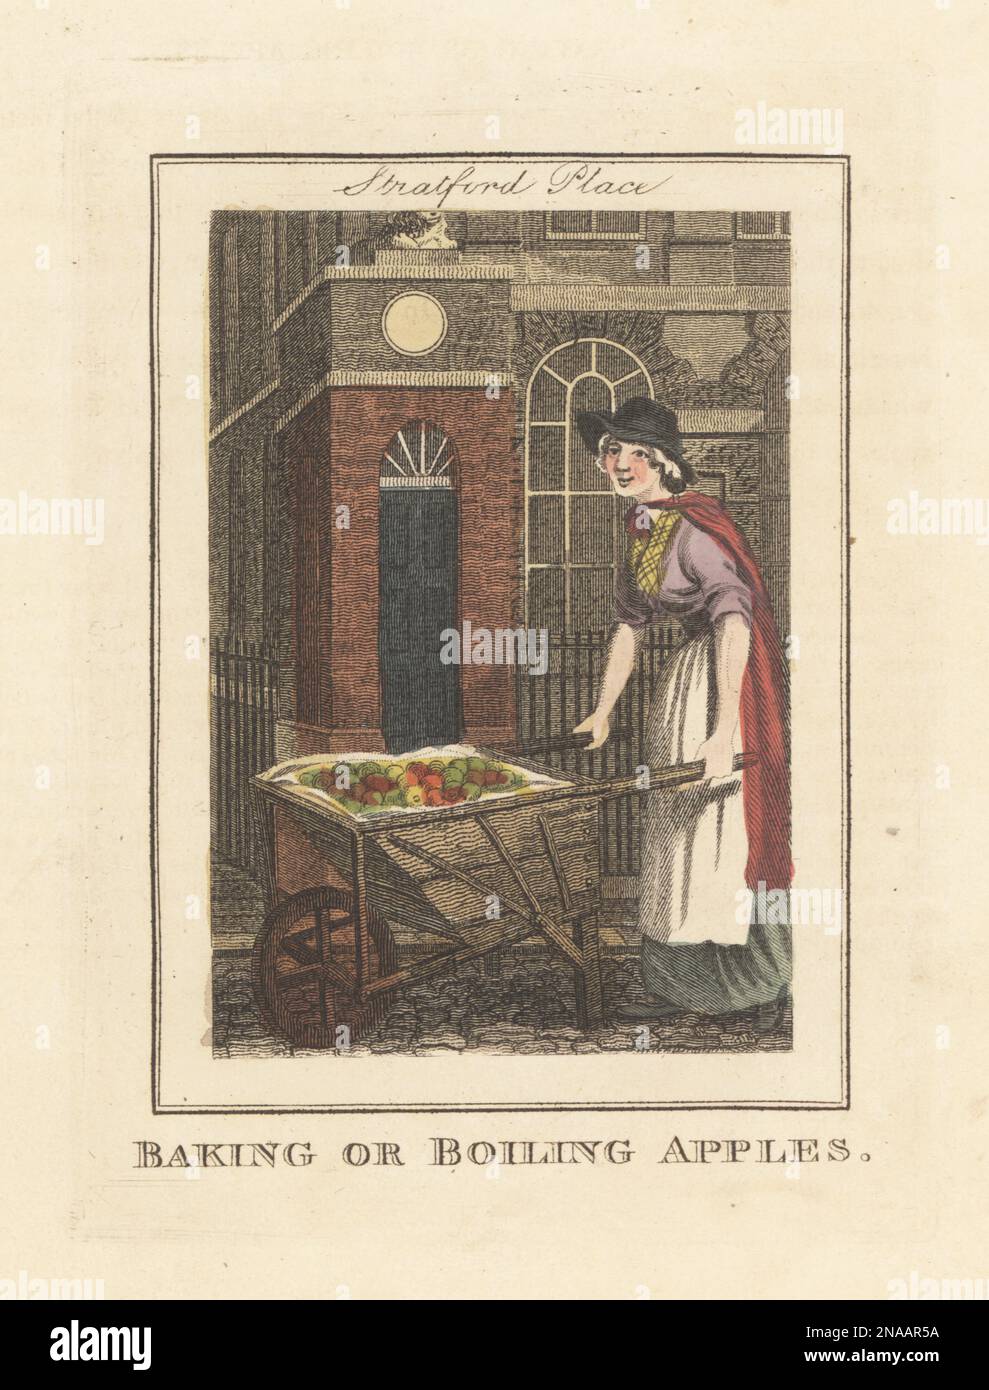 Woman apple seller in Stratford Place, London. Woman in bonnet, cloak, apron and skirts, with wheelbarrow full of apples, sold hot in winter. Baking or boiling apples! Handcoloured copperplate engraving by Edward Edwards after an illustration by William Marshall Craig from Description of the Plates Representing the Itinerant Traders of London, Richard Phillips, No. 71 St Paul’s Churchyard, London, 1805. Stock Photo